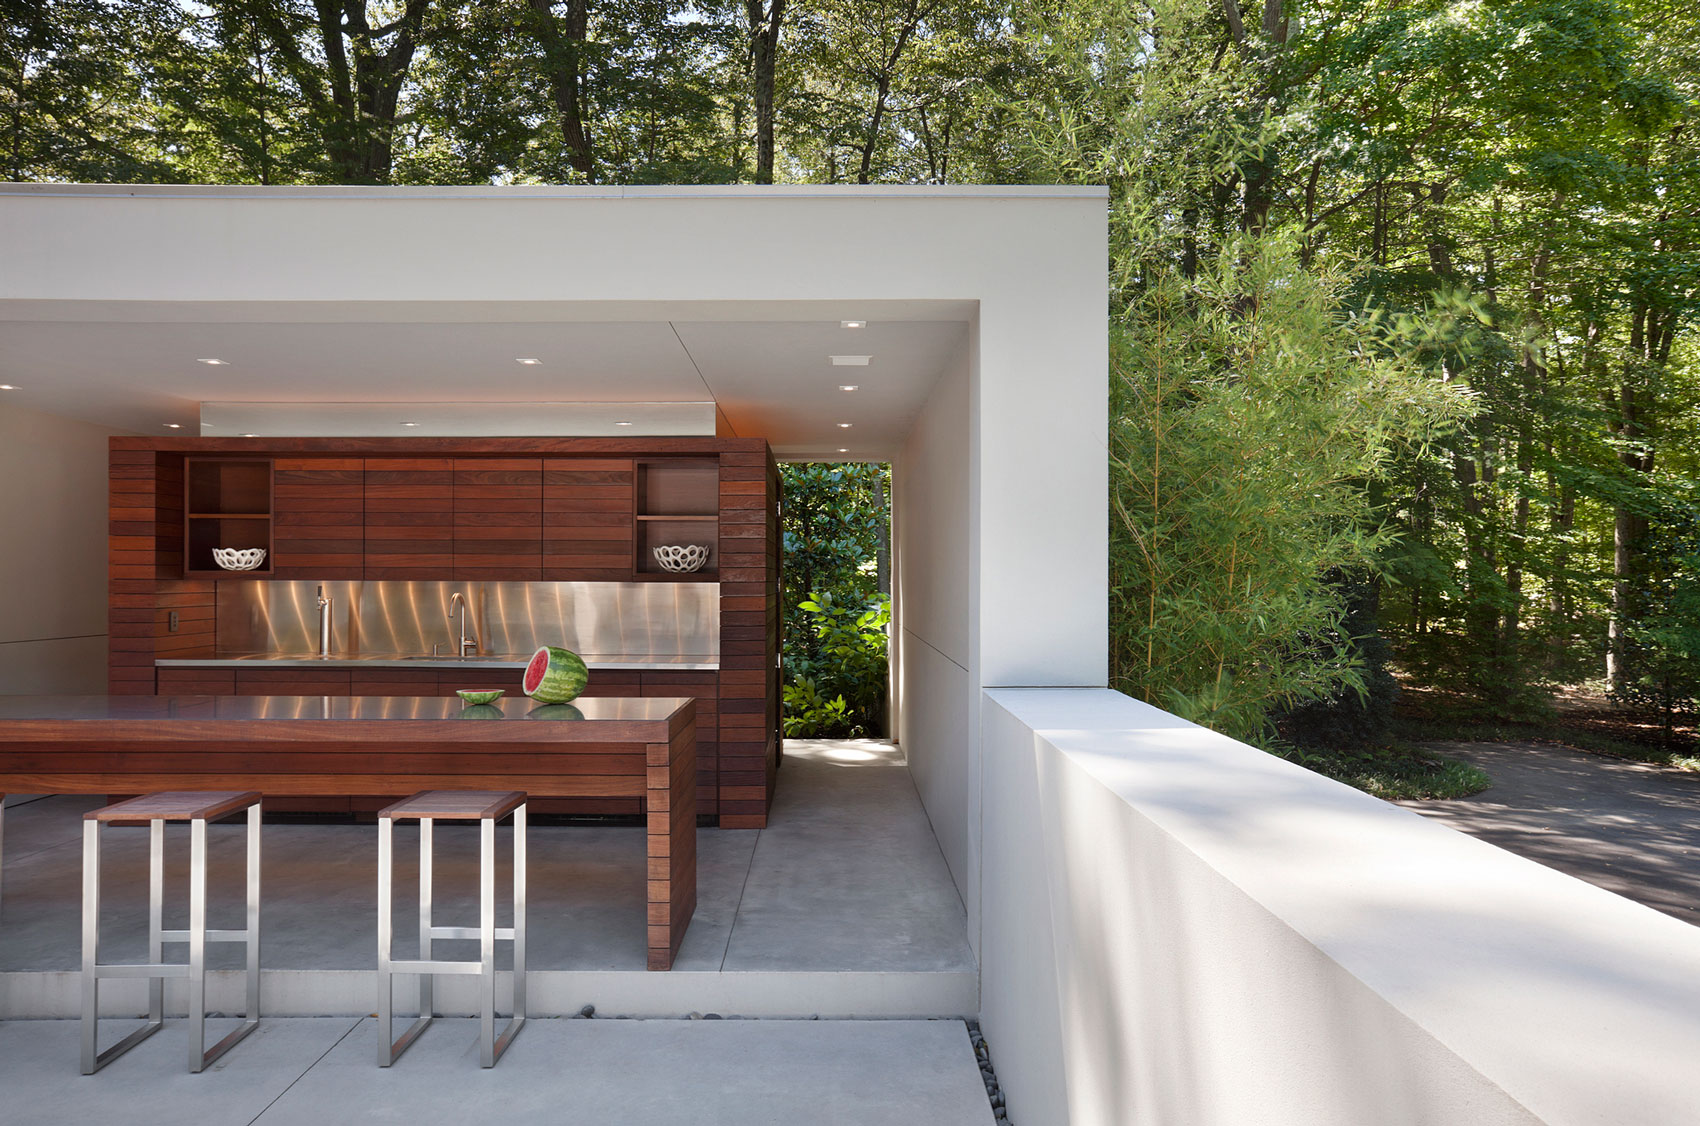 entrancing-cool-cabinets-along-with-stainless-steel-backsplash-on-modern-outdoor-kitchen-in-addition-to-flat-roof-along-with-square-stool-pads